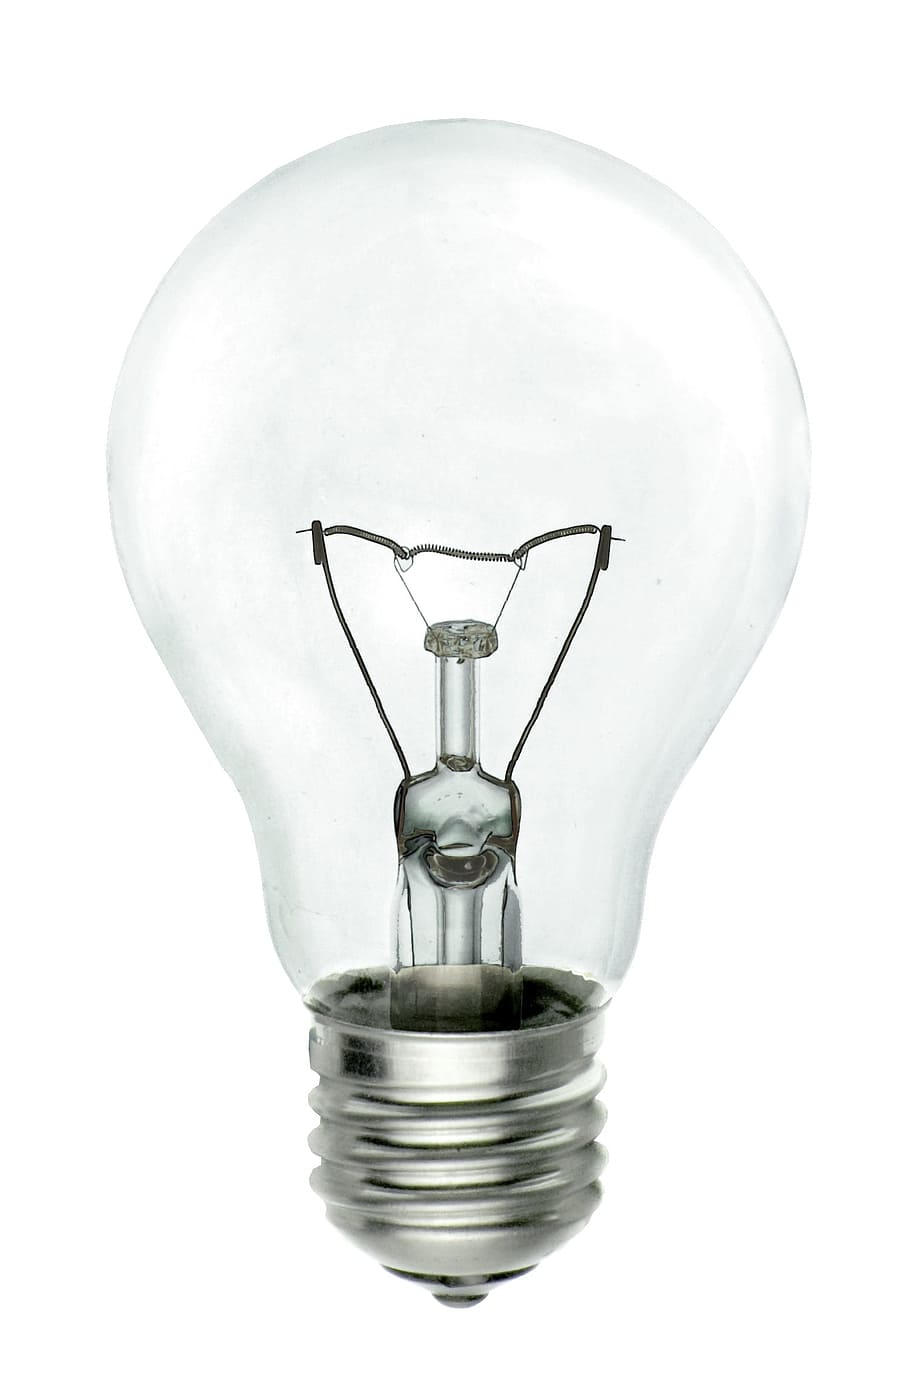 close up photo of turned off light bulb, electricity, energy